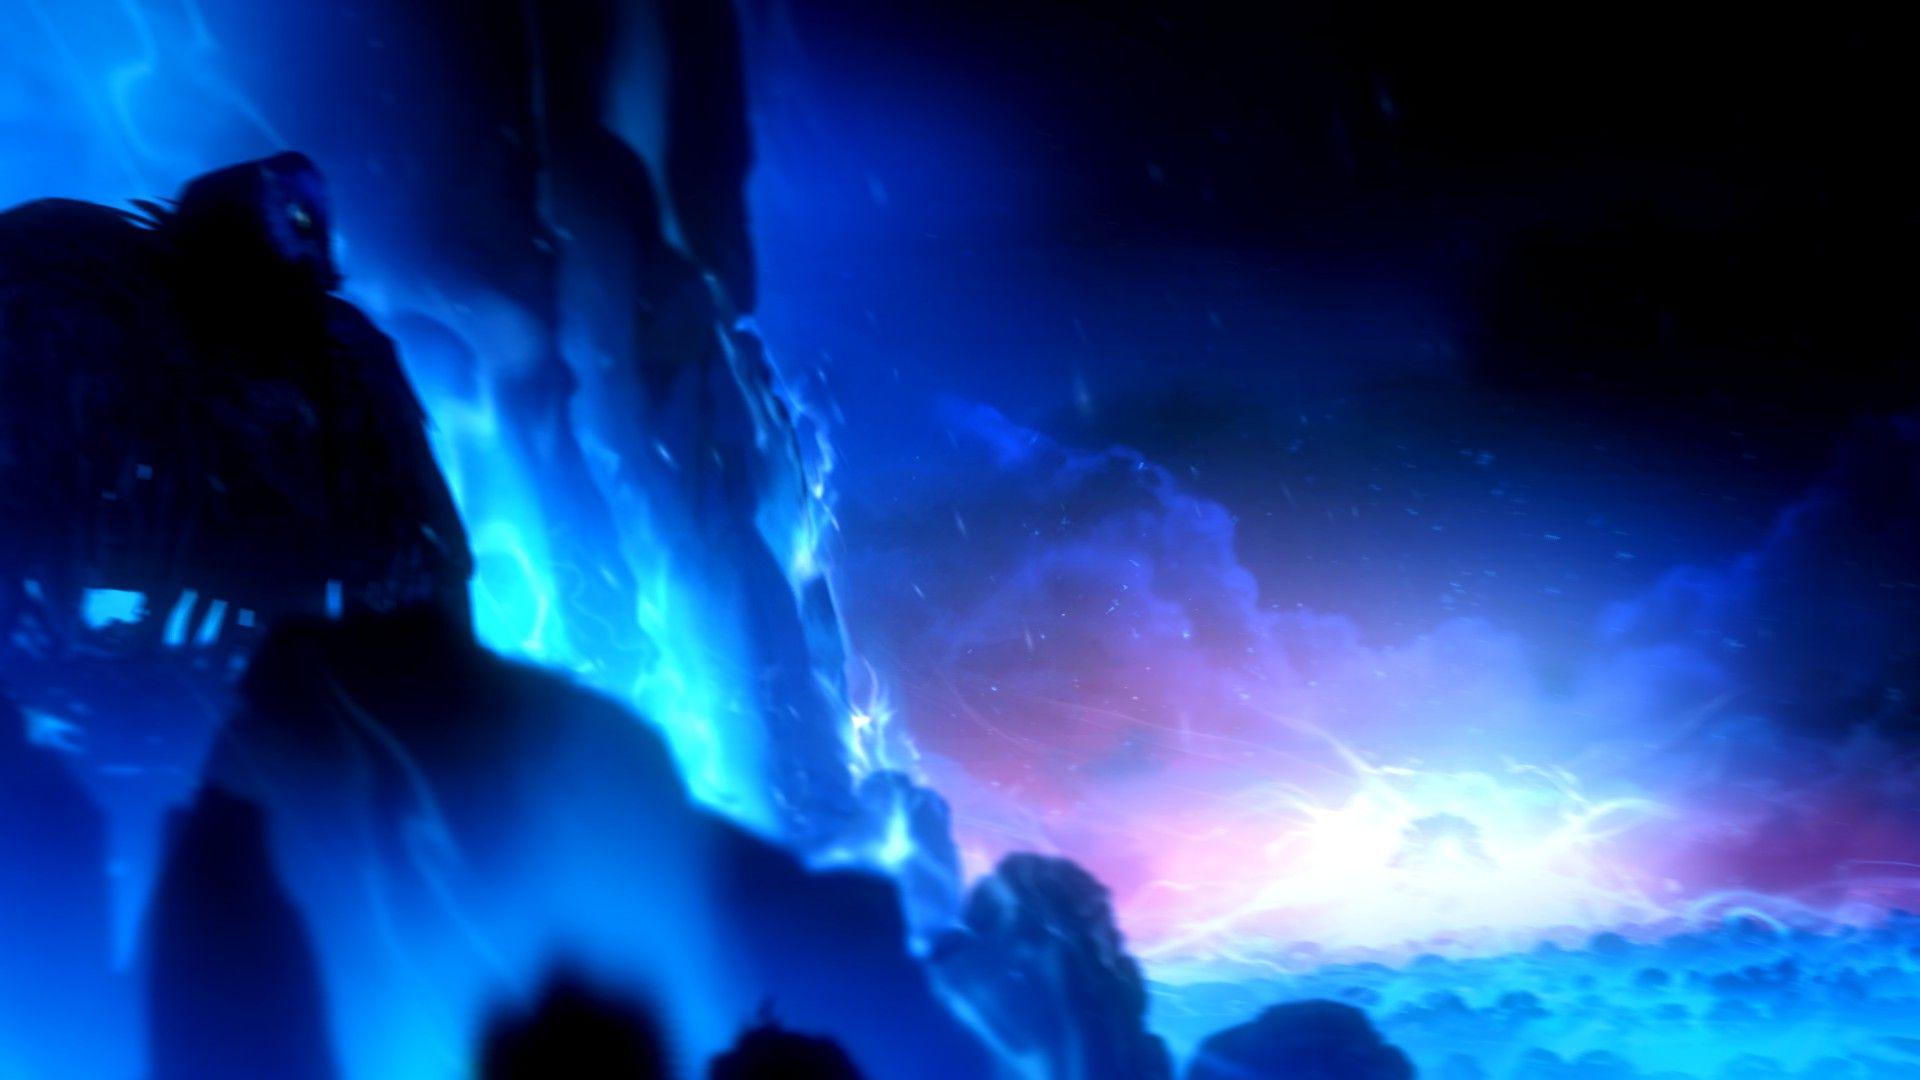 Ori and The Blind Forest Wallpaper dump (1920x1080)